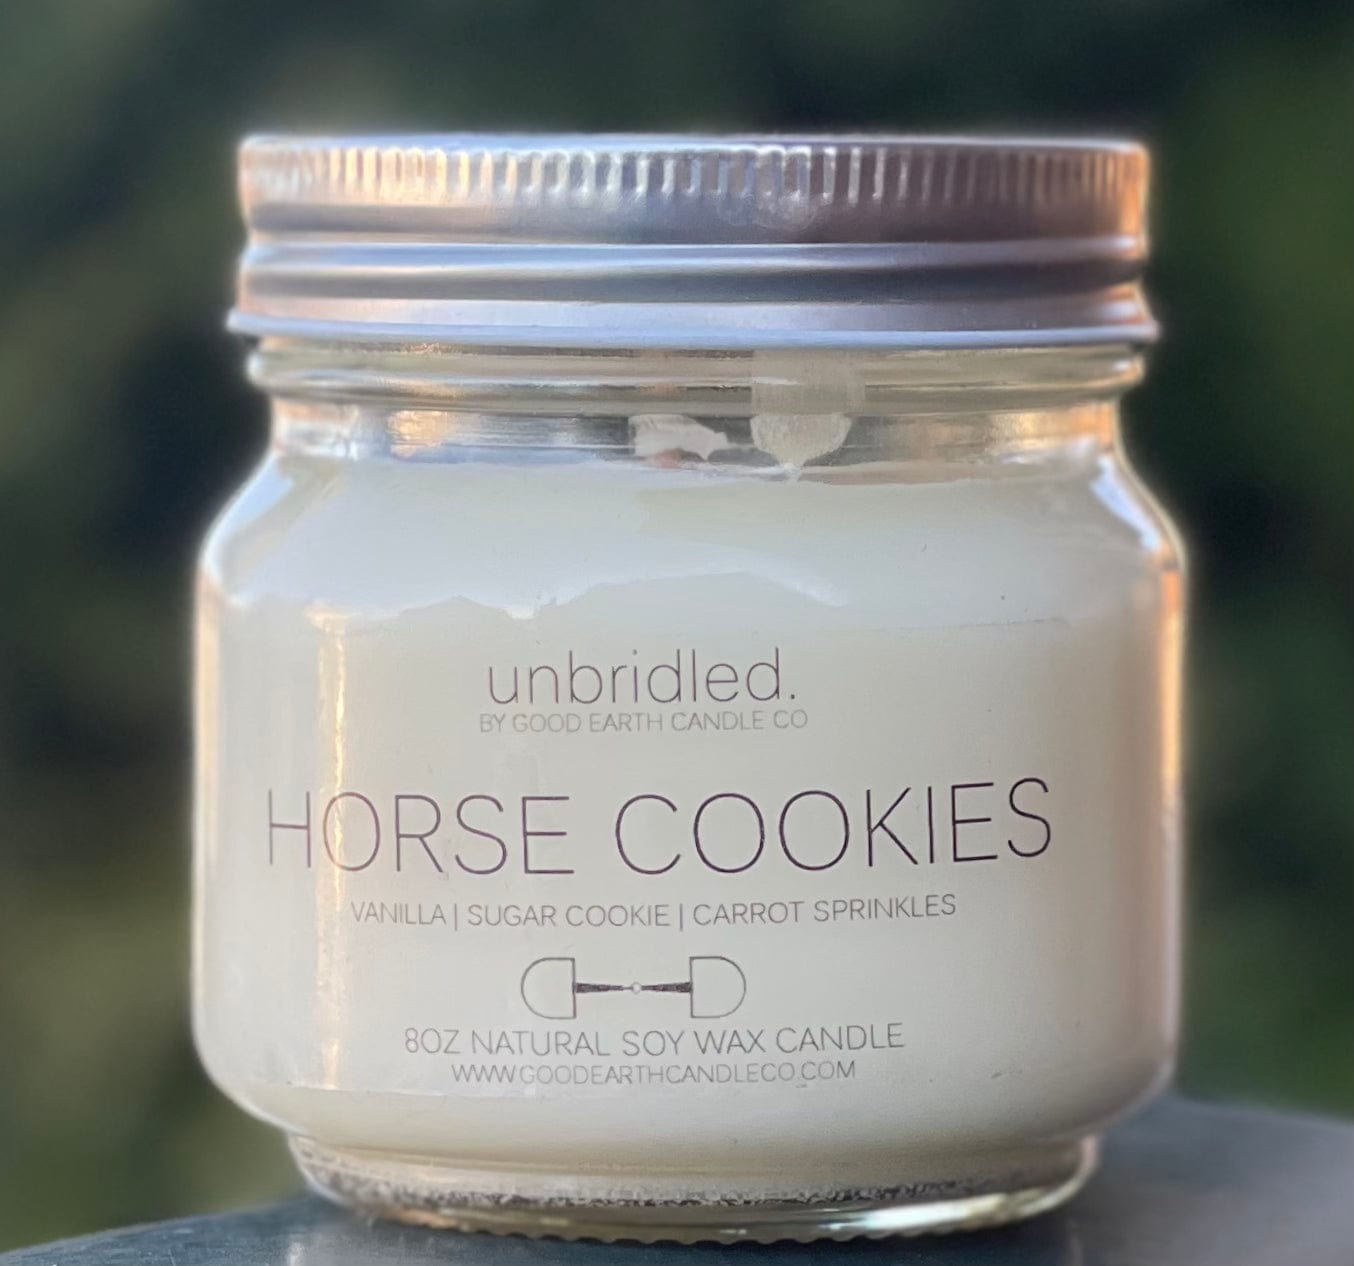 Good Earth Good Earth Candle - Horse Cookies equestrian team apparel online tack store mobile tack store custom farm apparel custom show stable clothing equestrian lifestyle horse show clothing riding clothes horses equestrian tack store